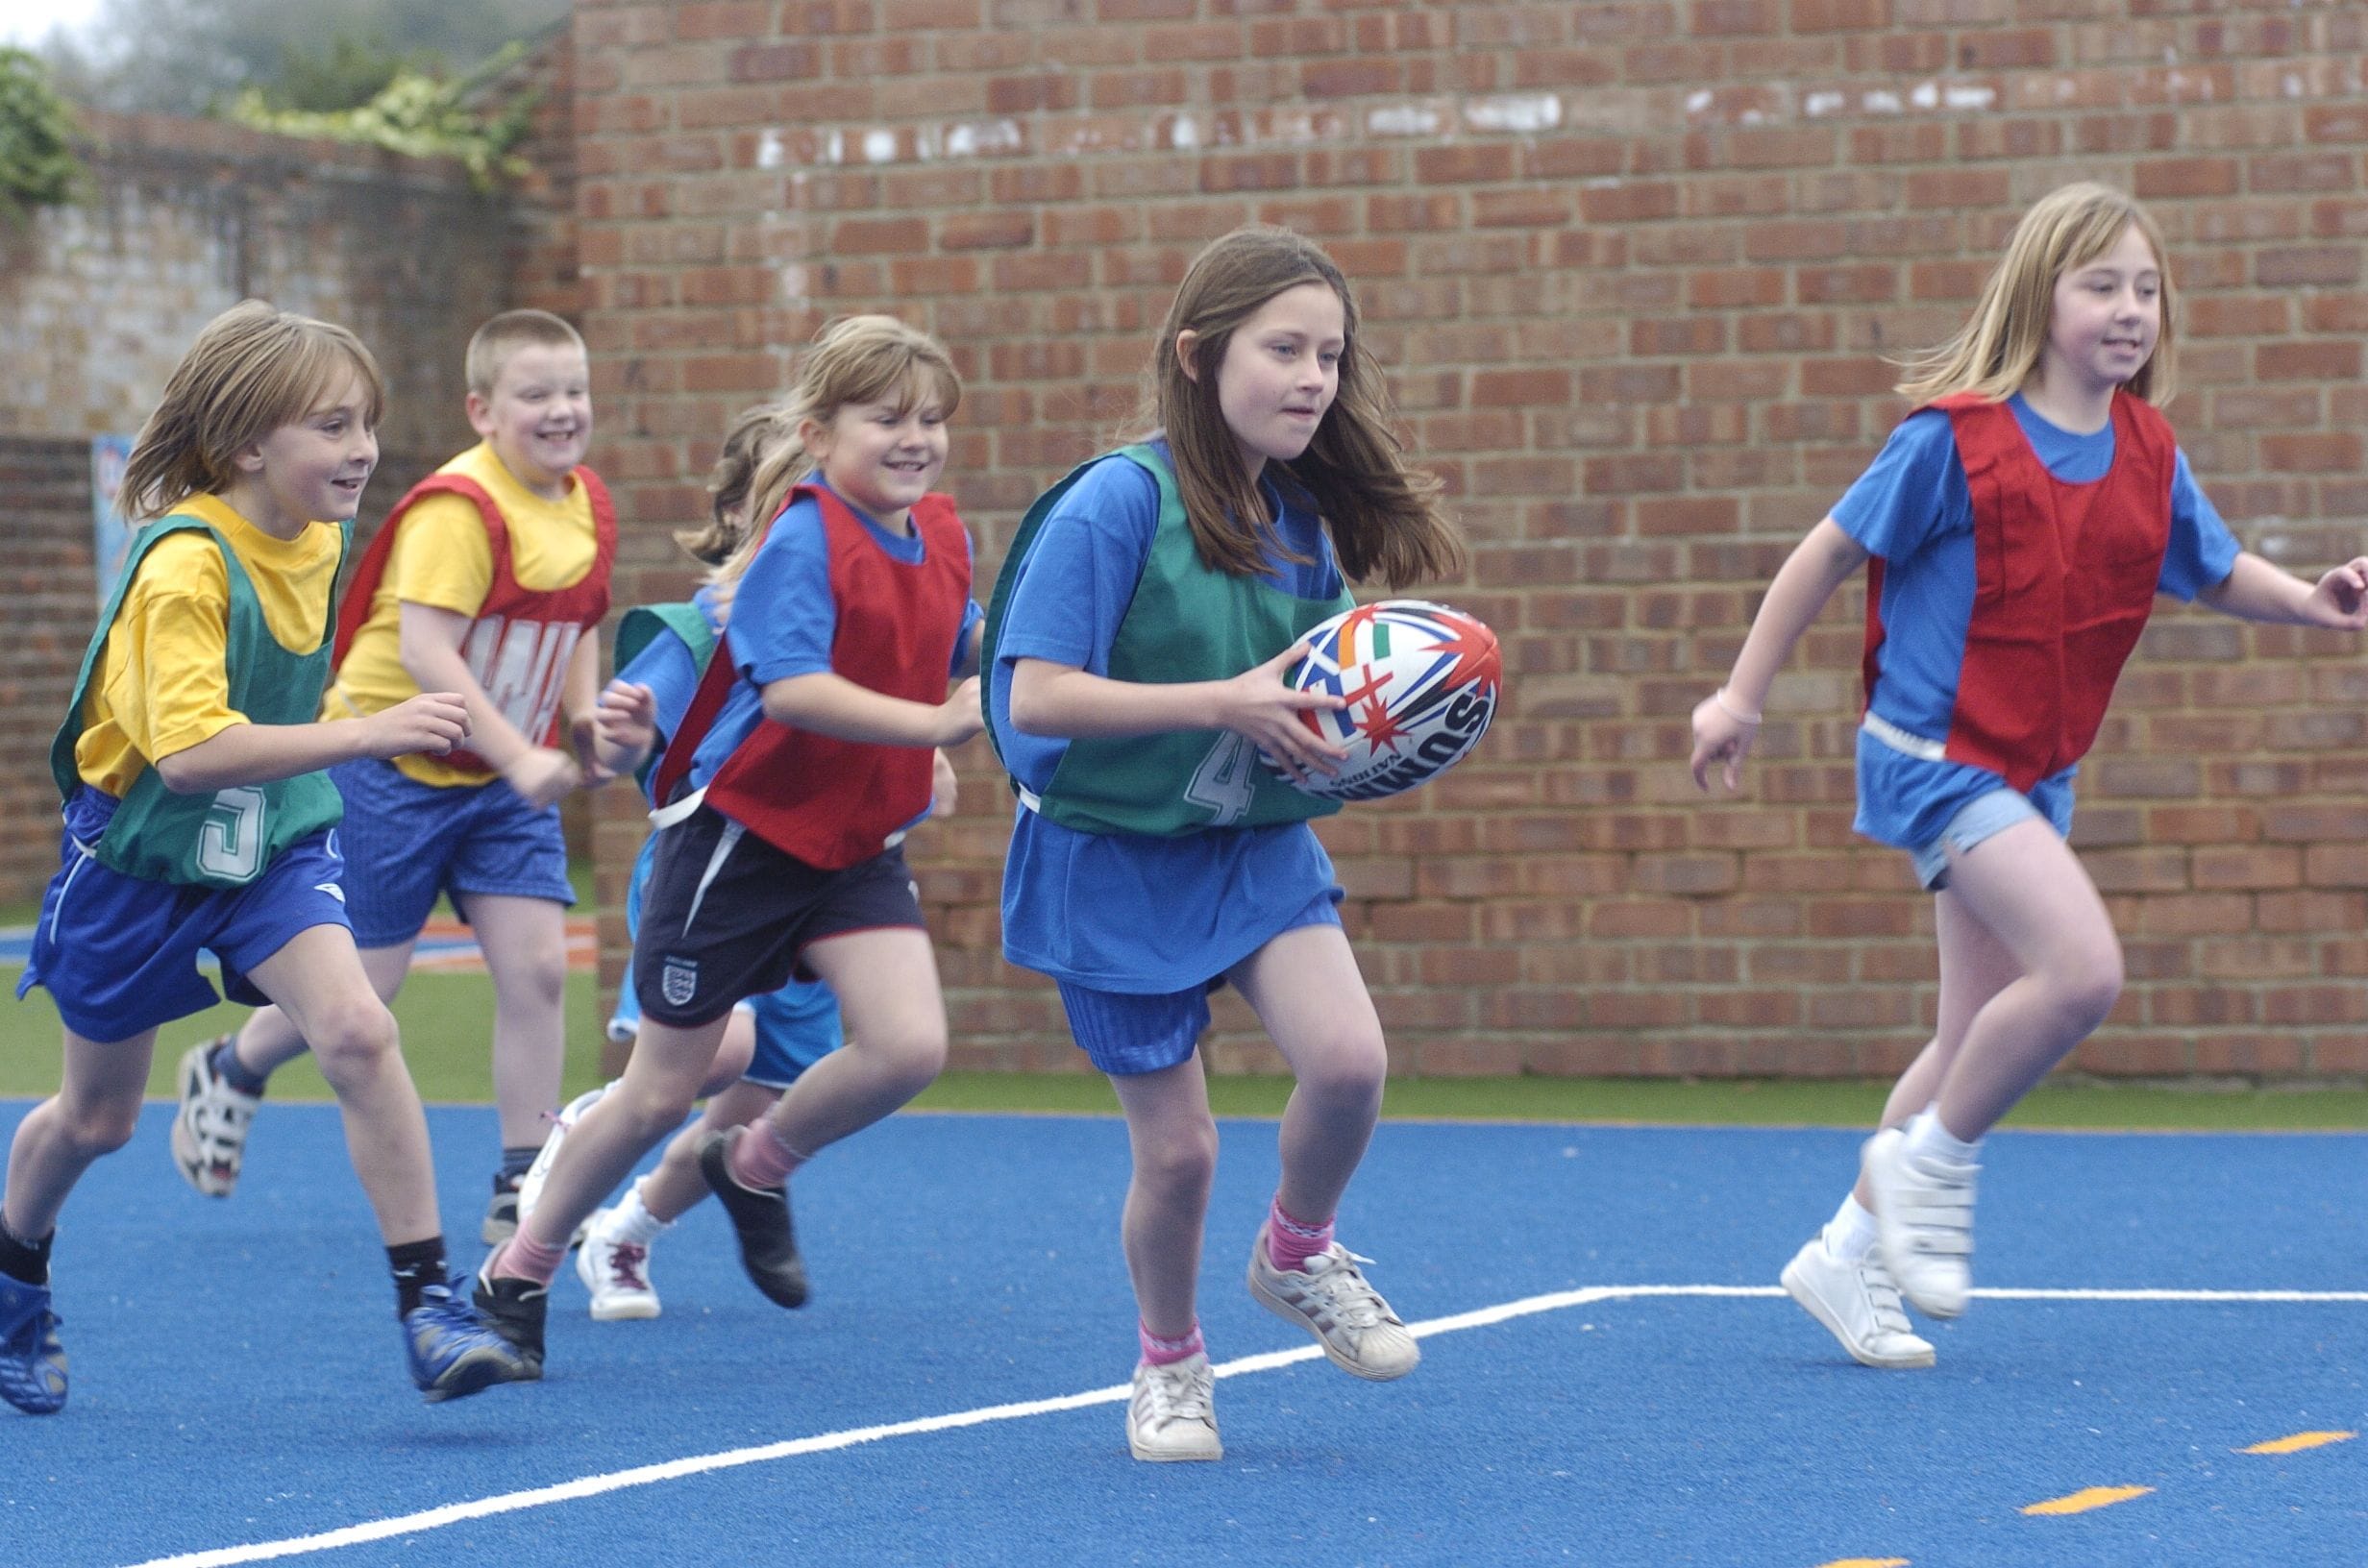 primary school pupils playing rugby on coloured artificial grass playground surface for Harndale Primary School